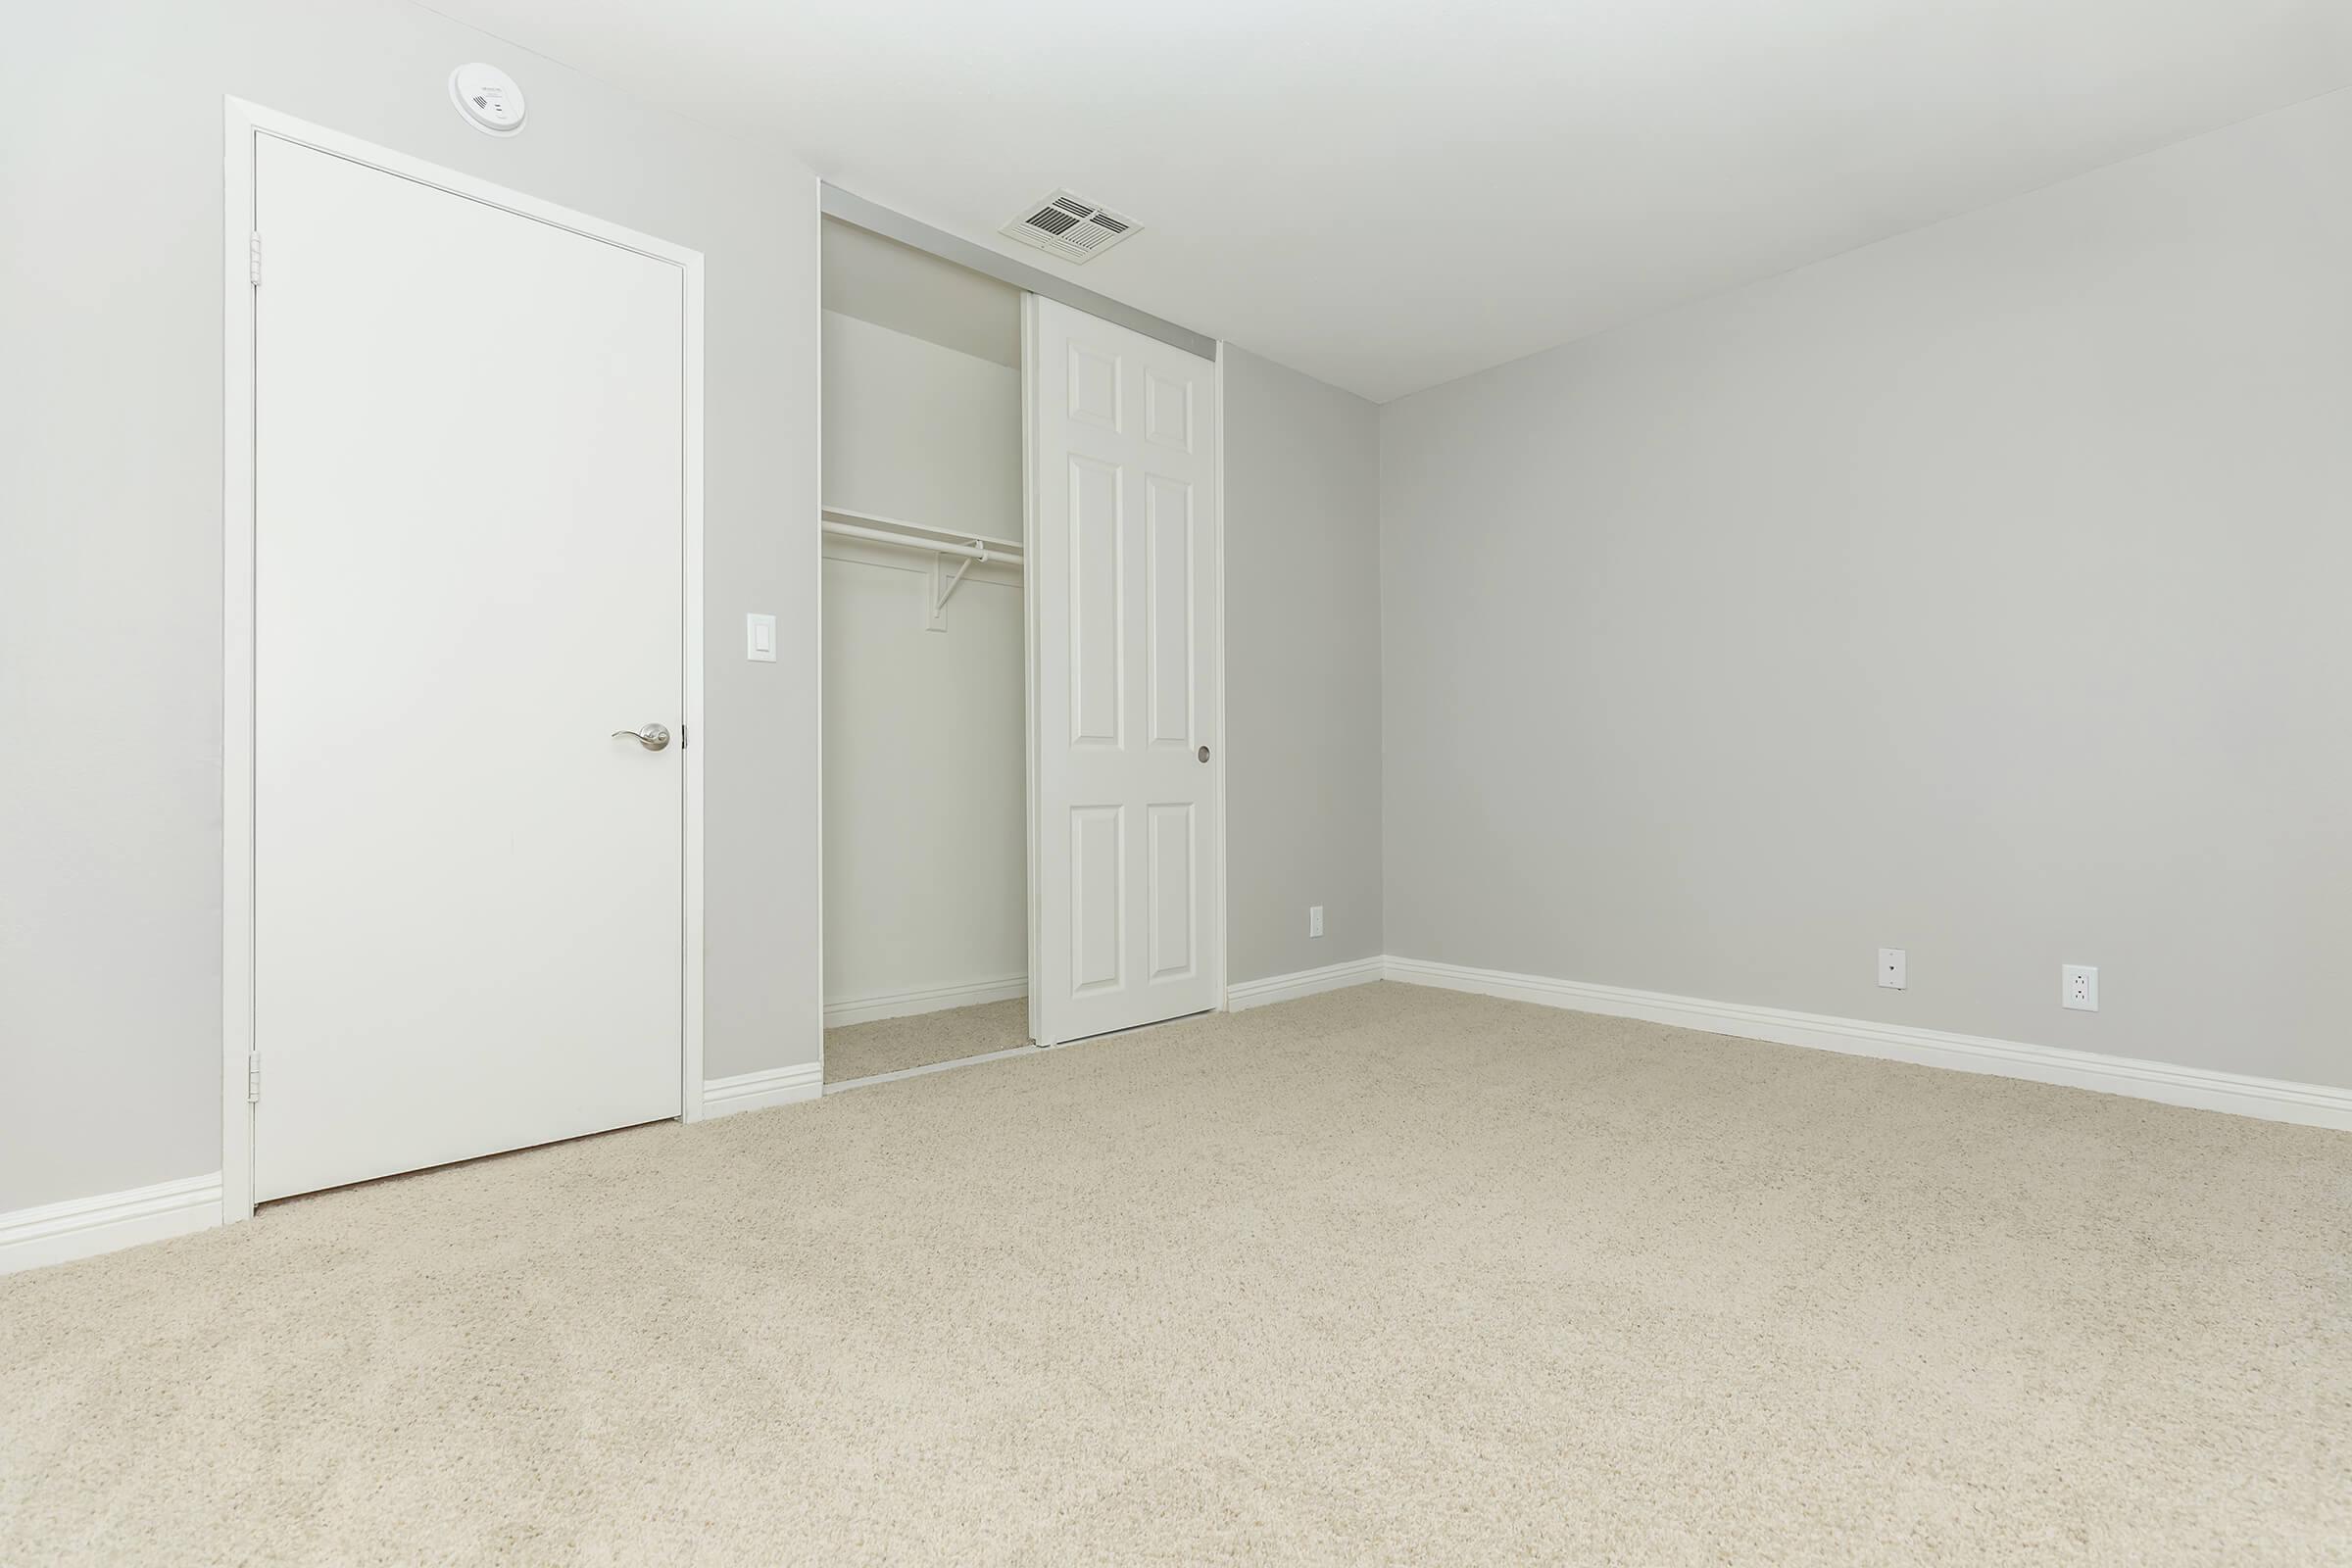 Vacant carpeted bedroom with sliding closet doors